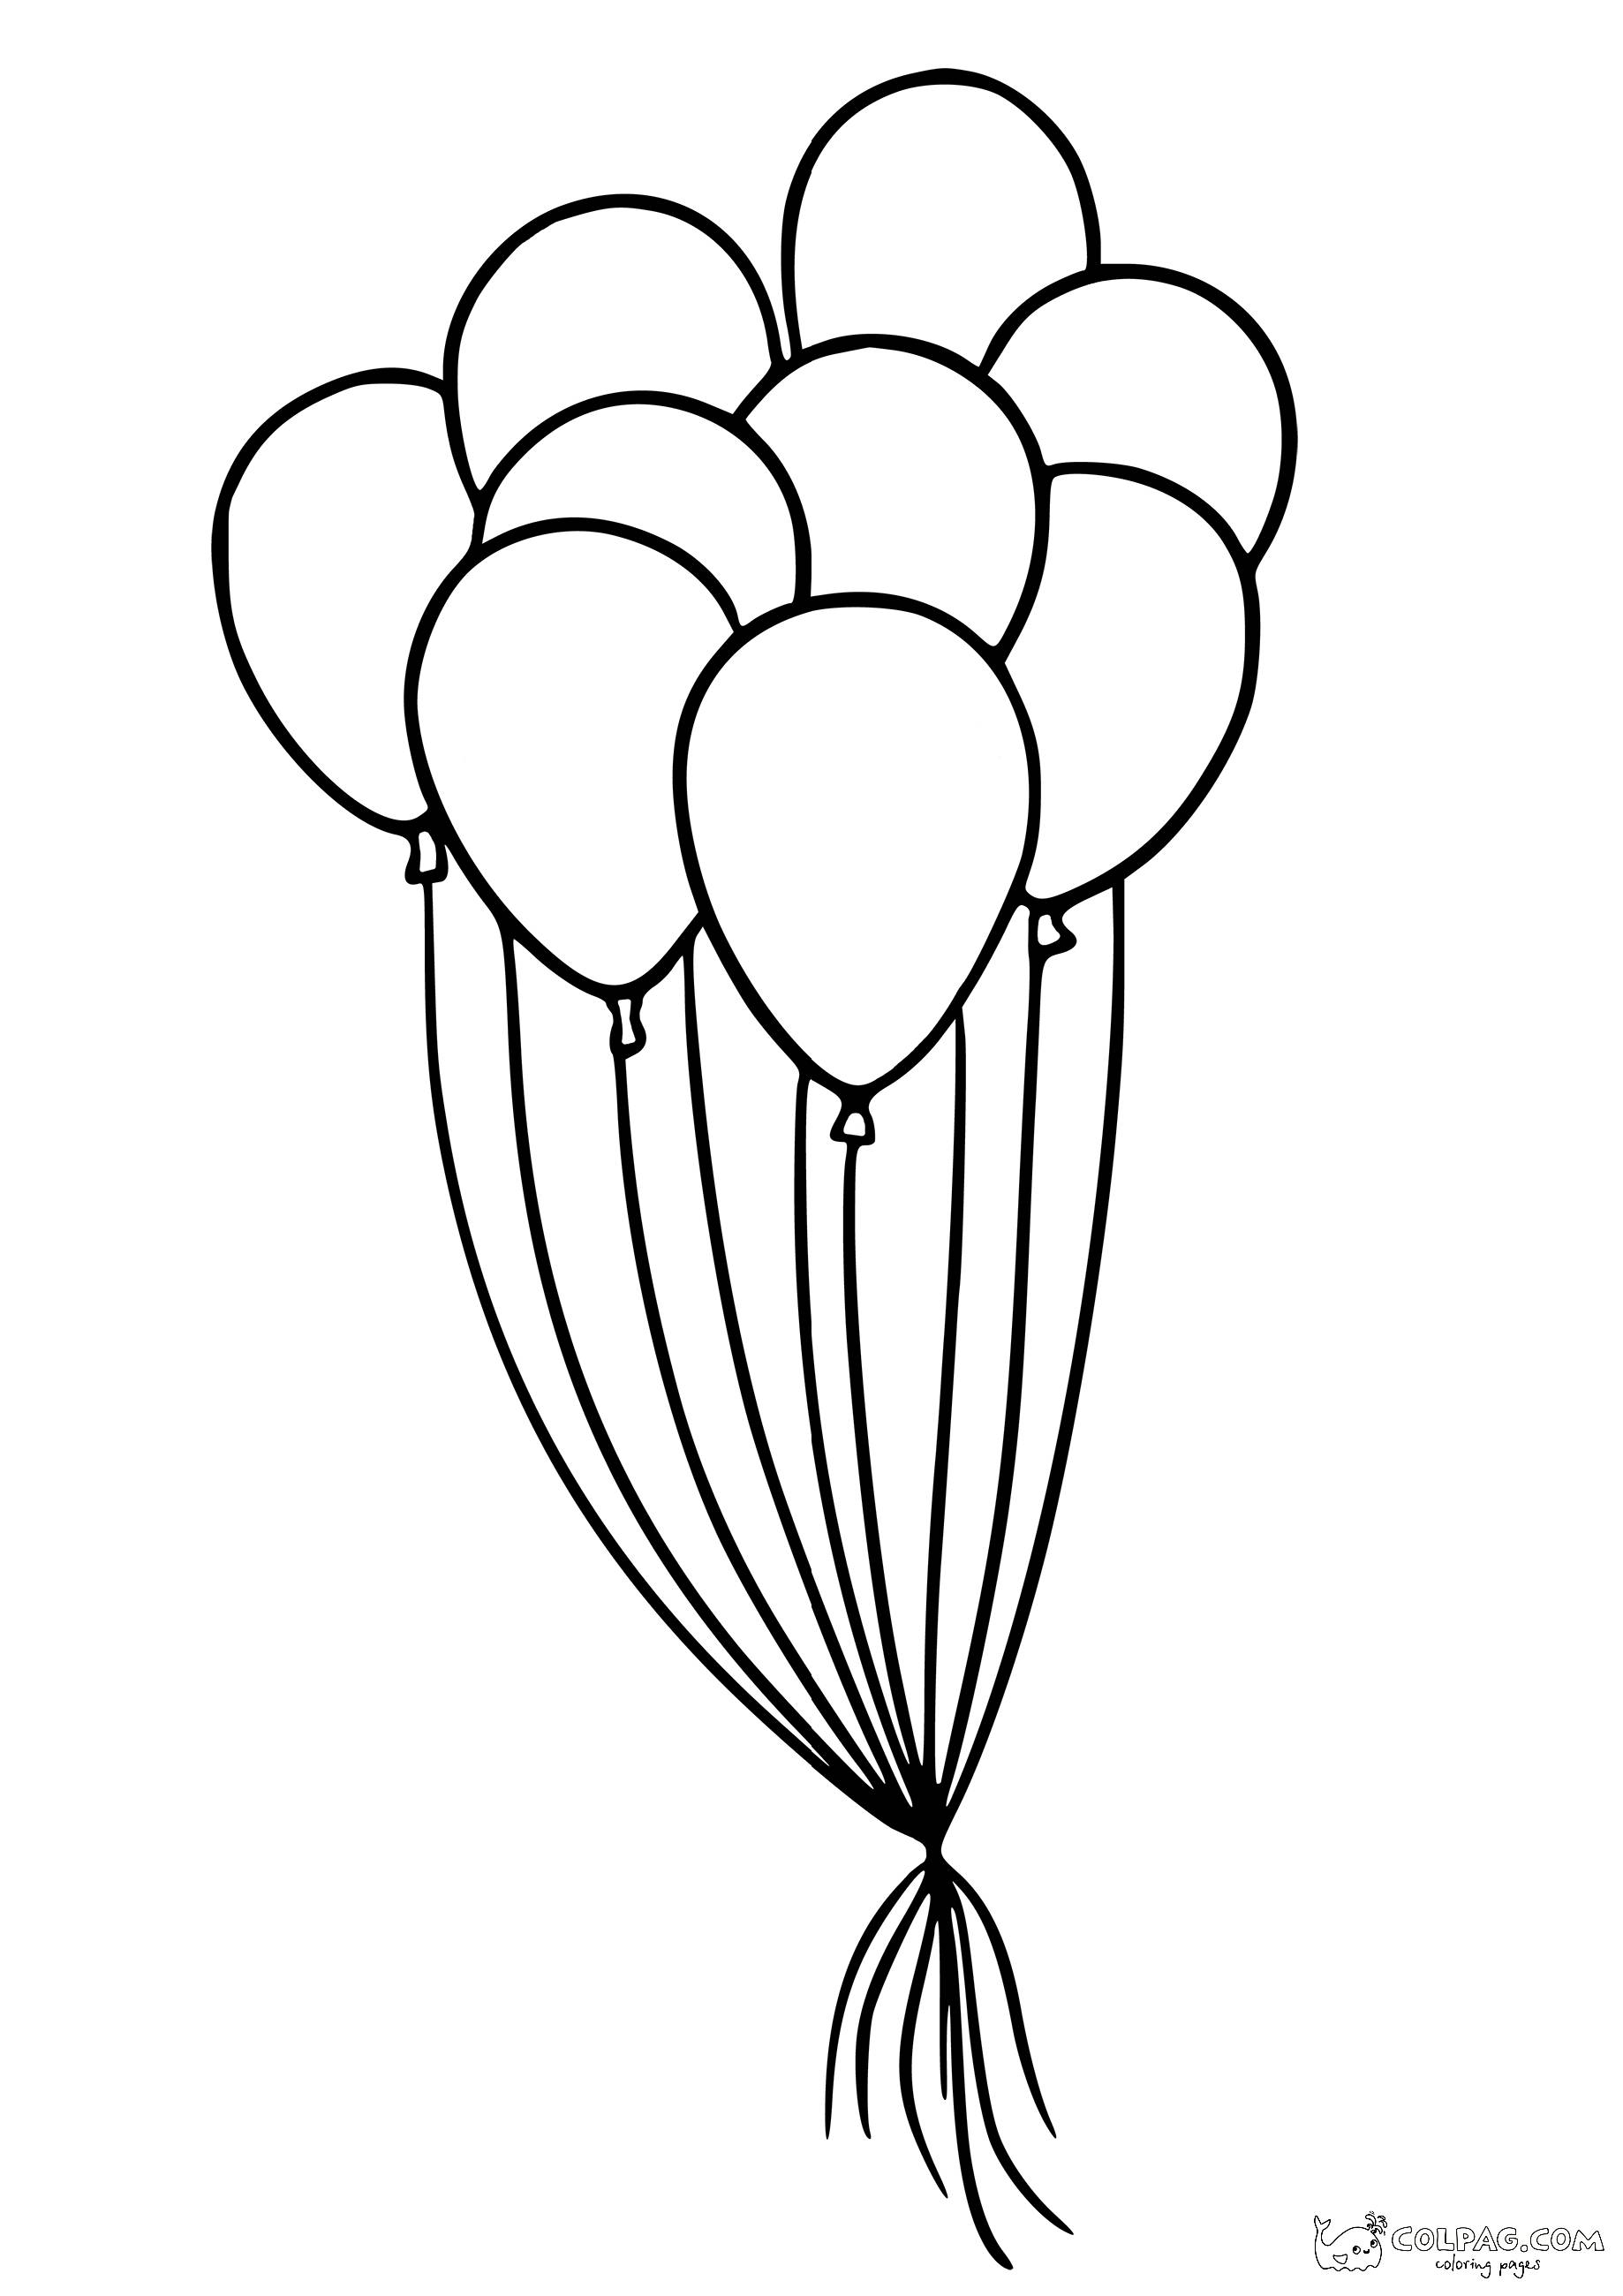 1-lots-of-funny-baloons-coloring-page-colpag-1